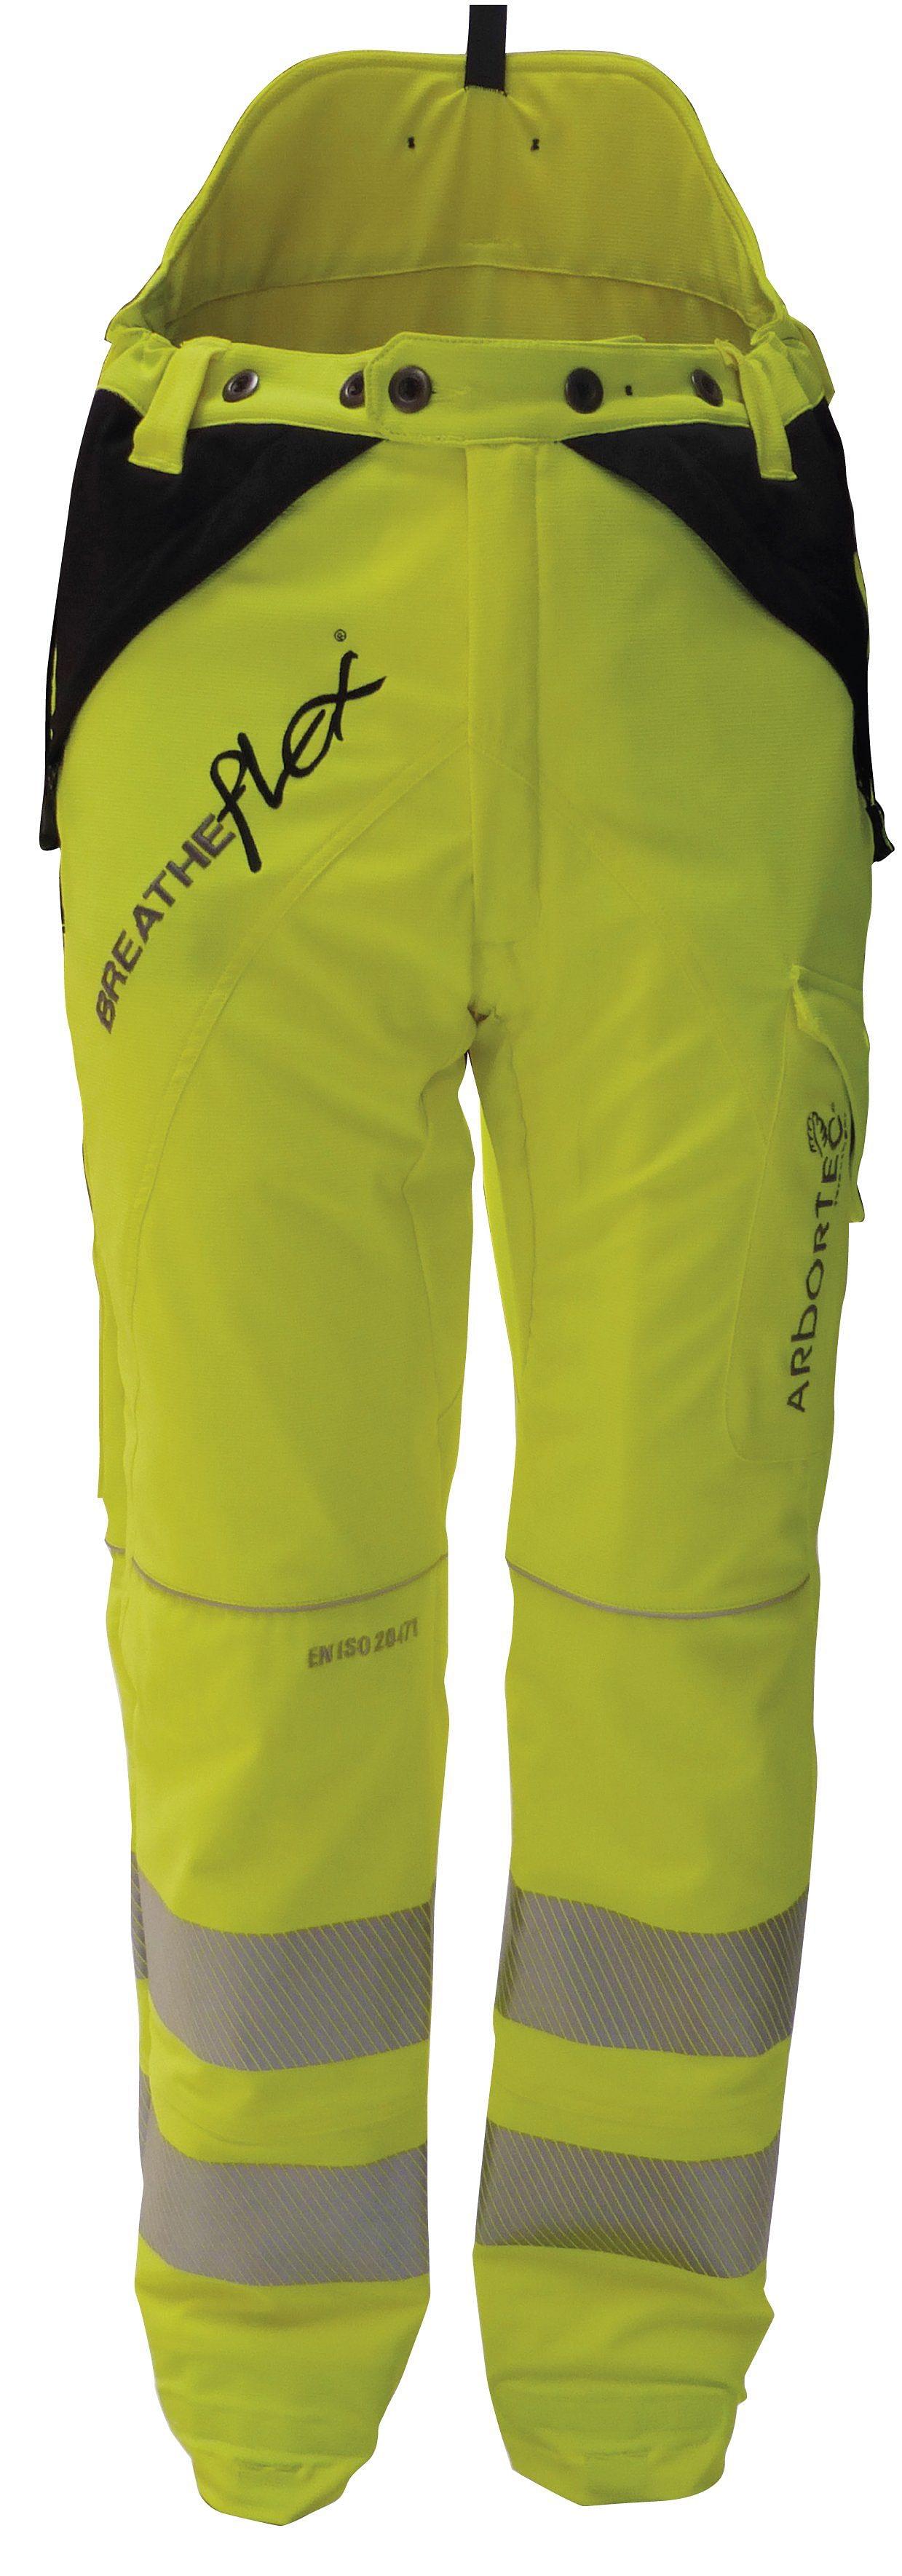 Solidur GLOW High Visibility Orange Chainsaw Trousers Type C  Logger  Clobber Specialist Solidur Retailer